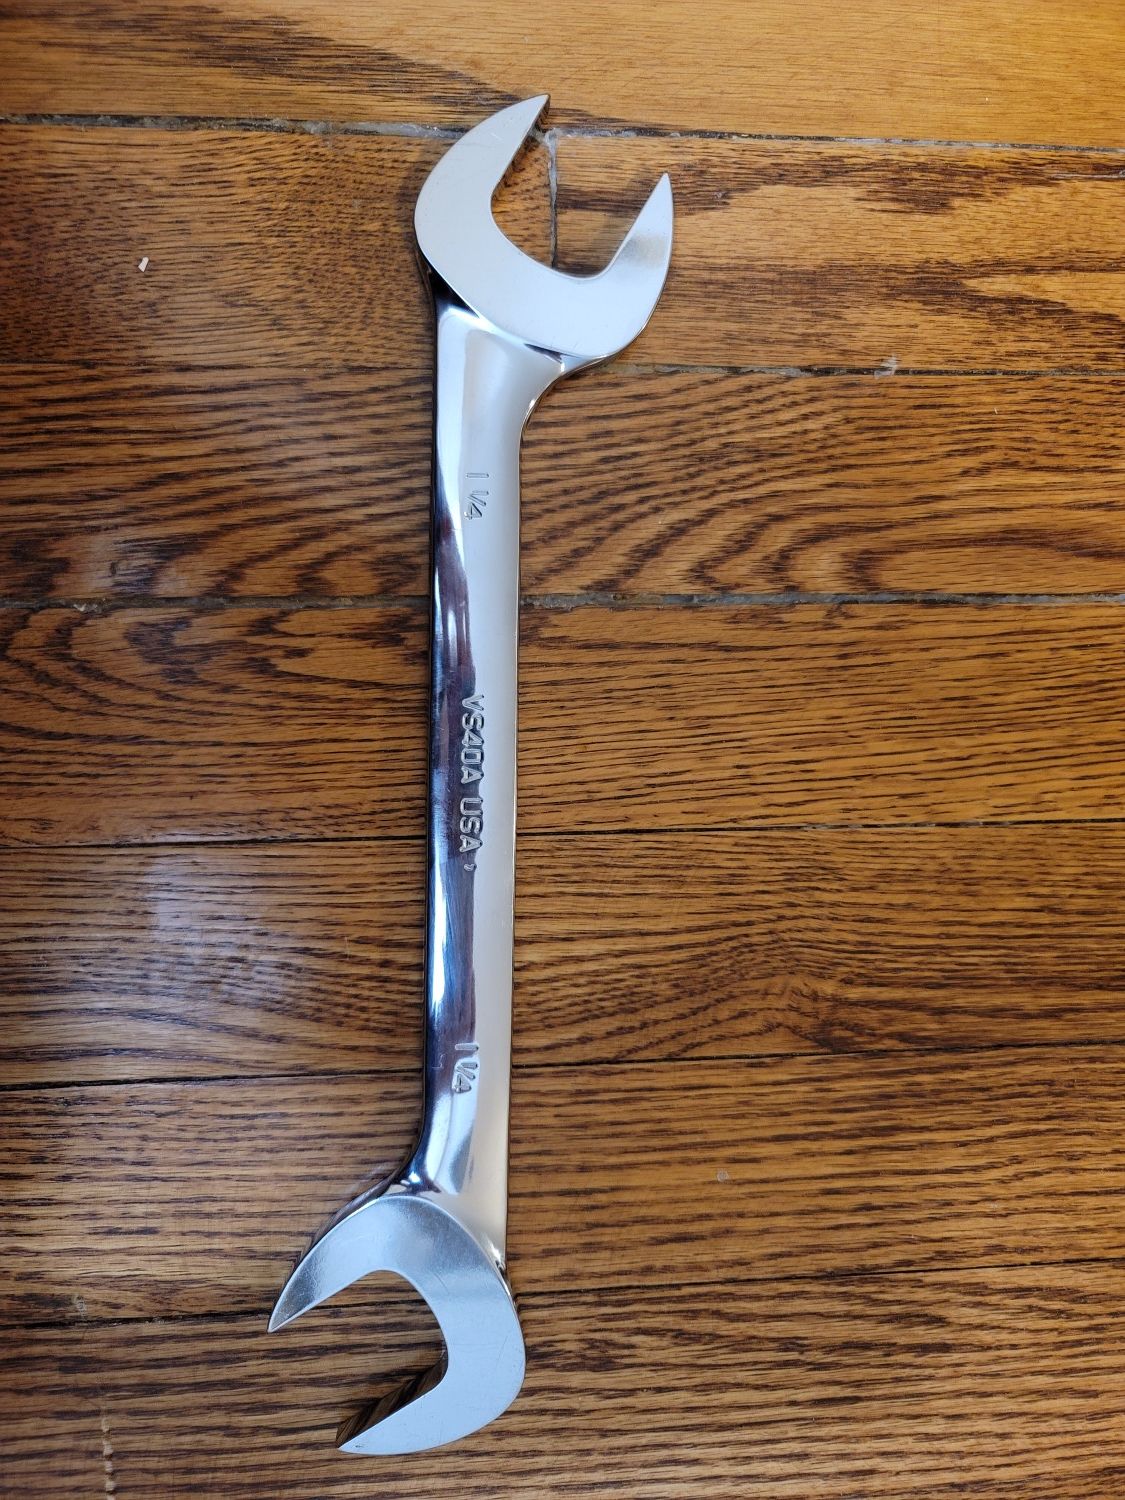 Snap On SAE Four-Way Angle Head Open-End Wrench 1-1/4" VS40A.